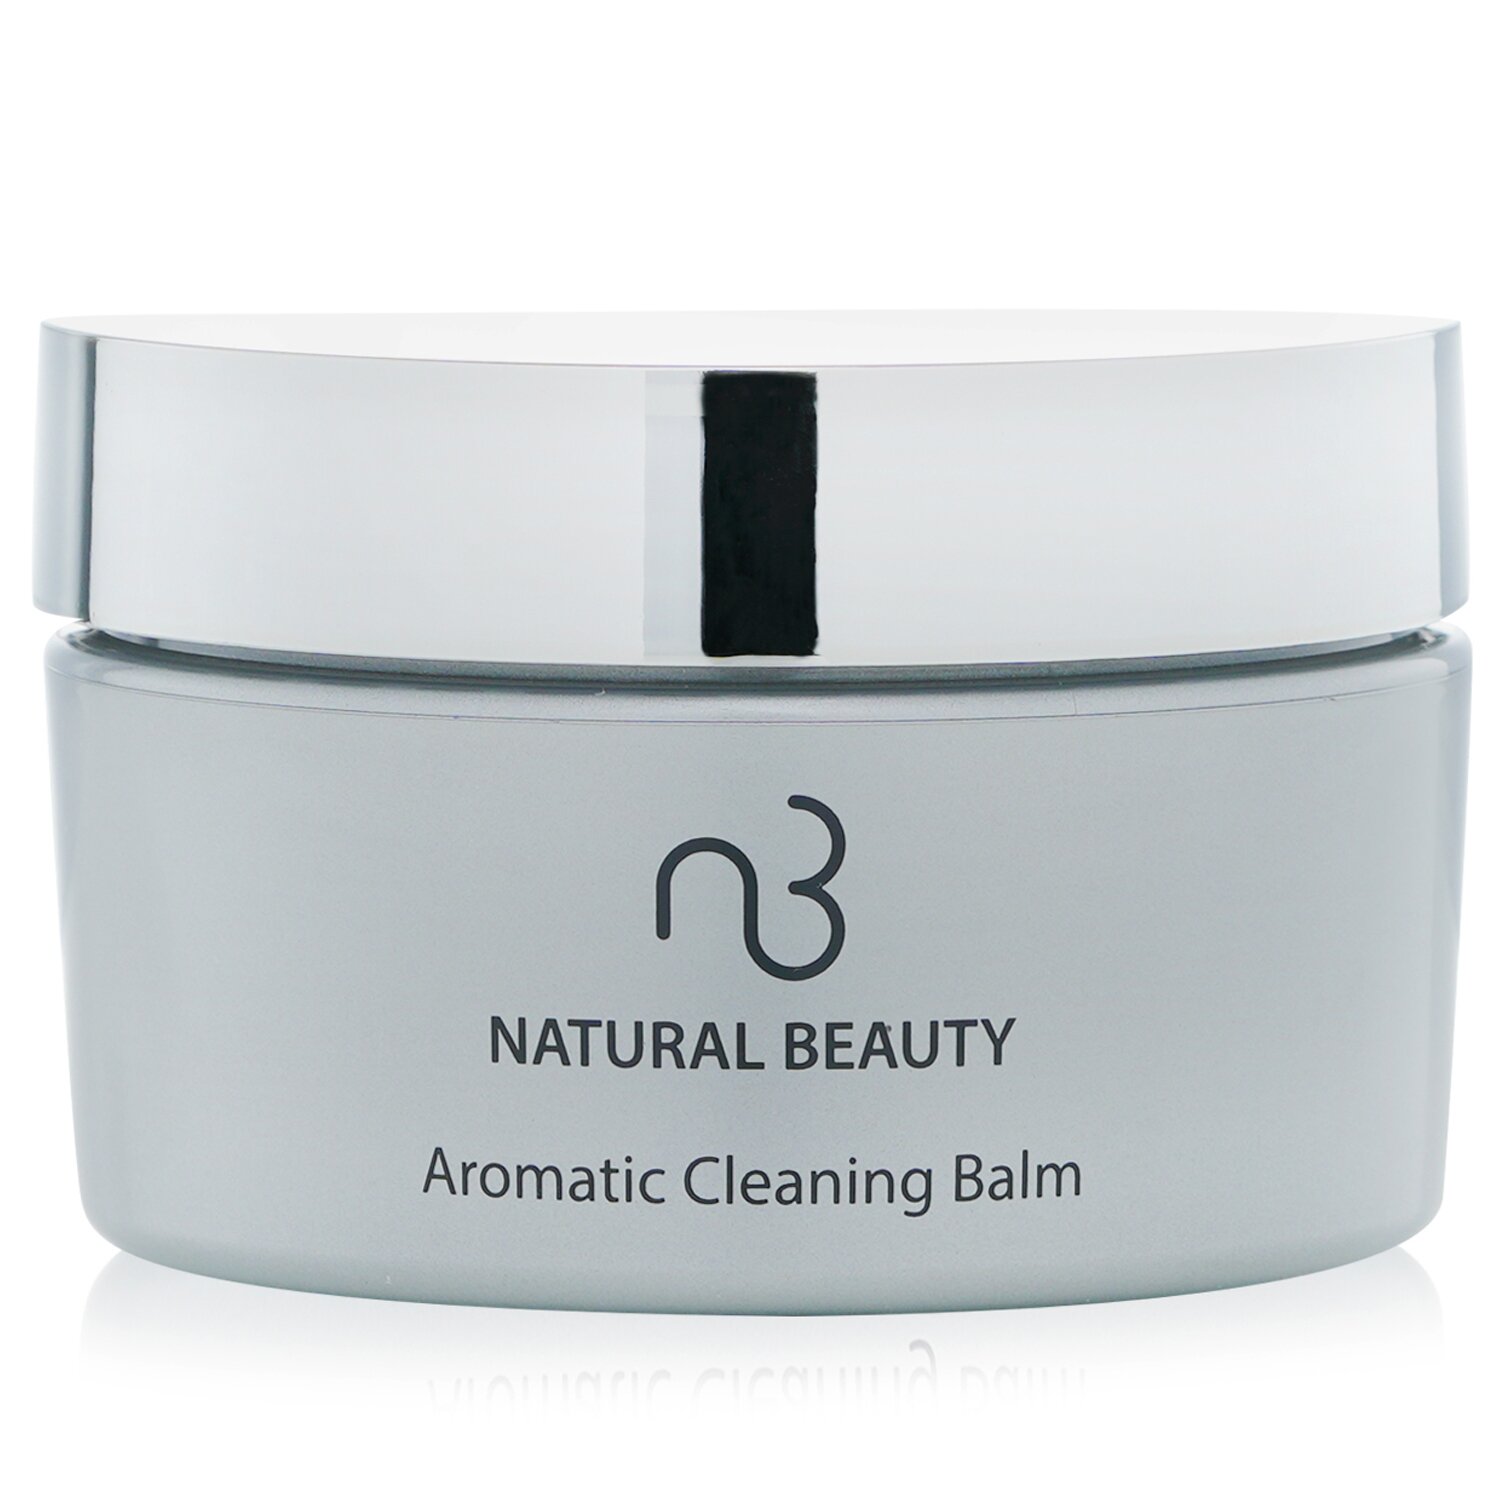 Natural Beauty Aromatic Cleaning Balm 85g/2.99oz